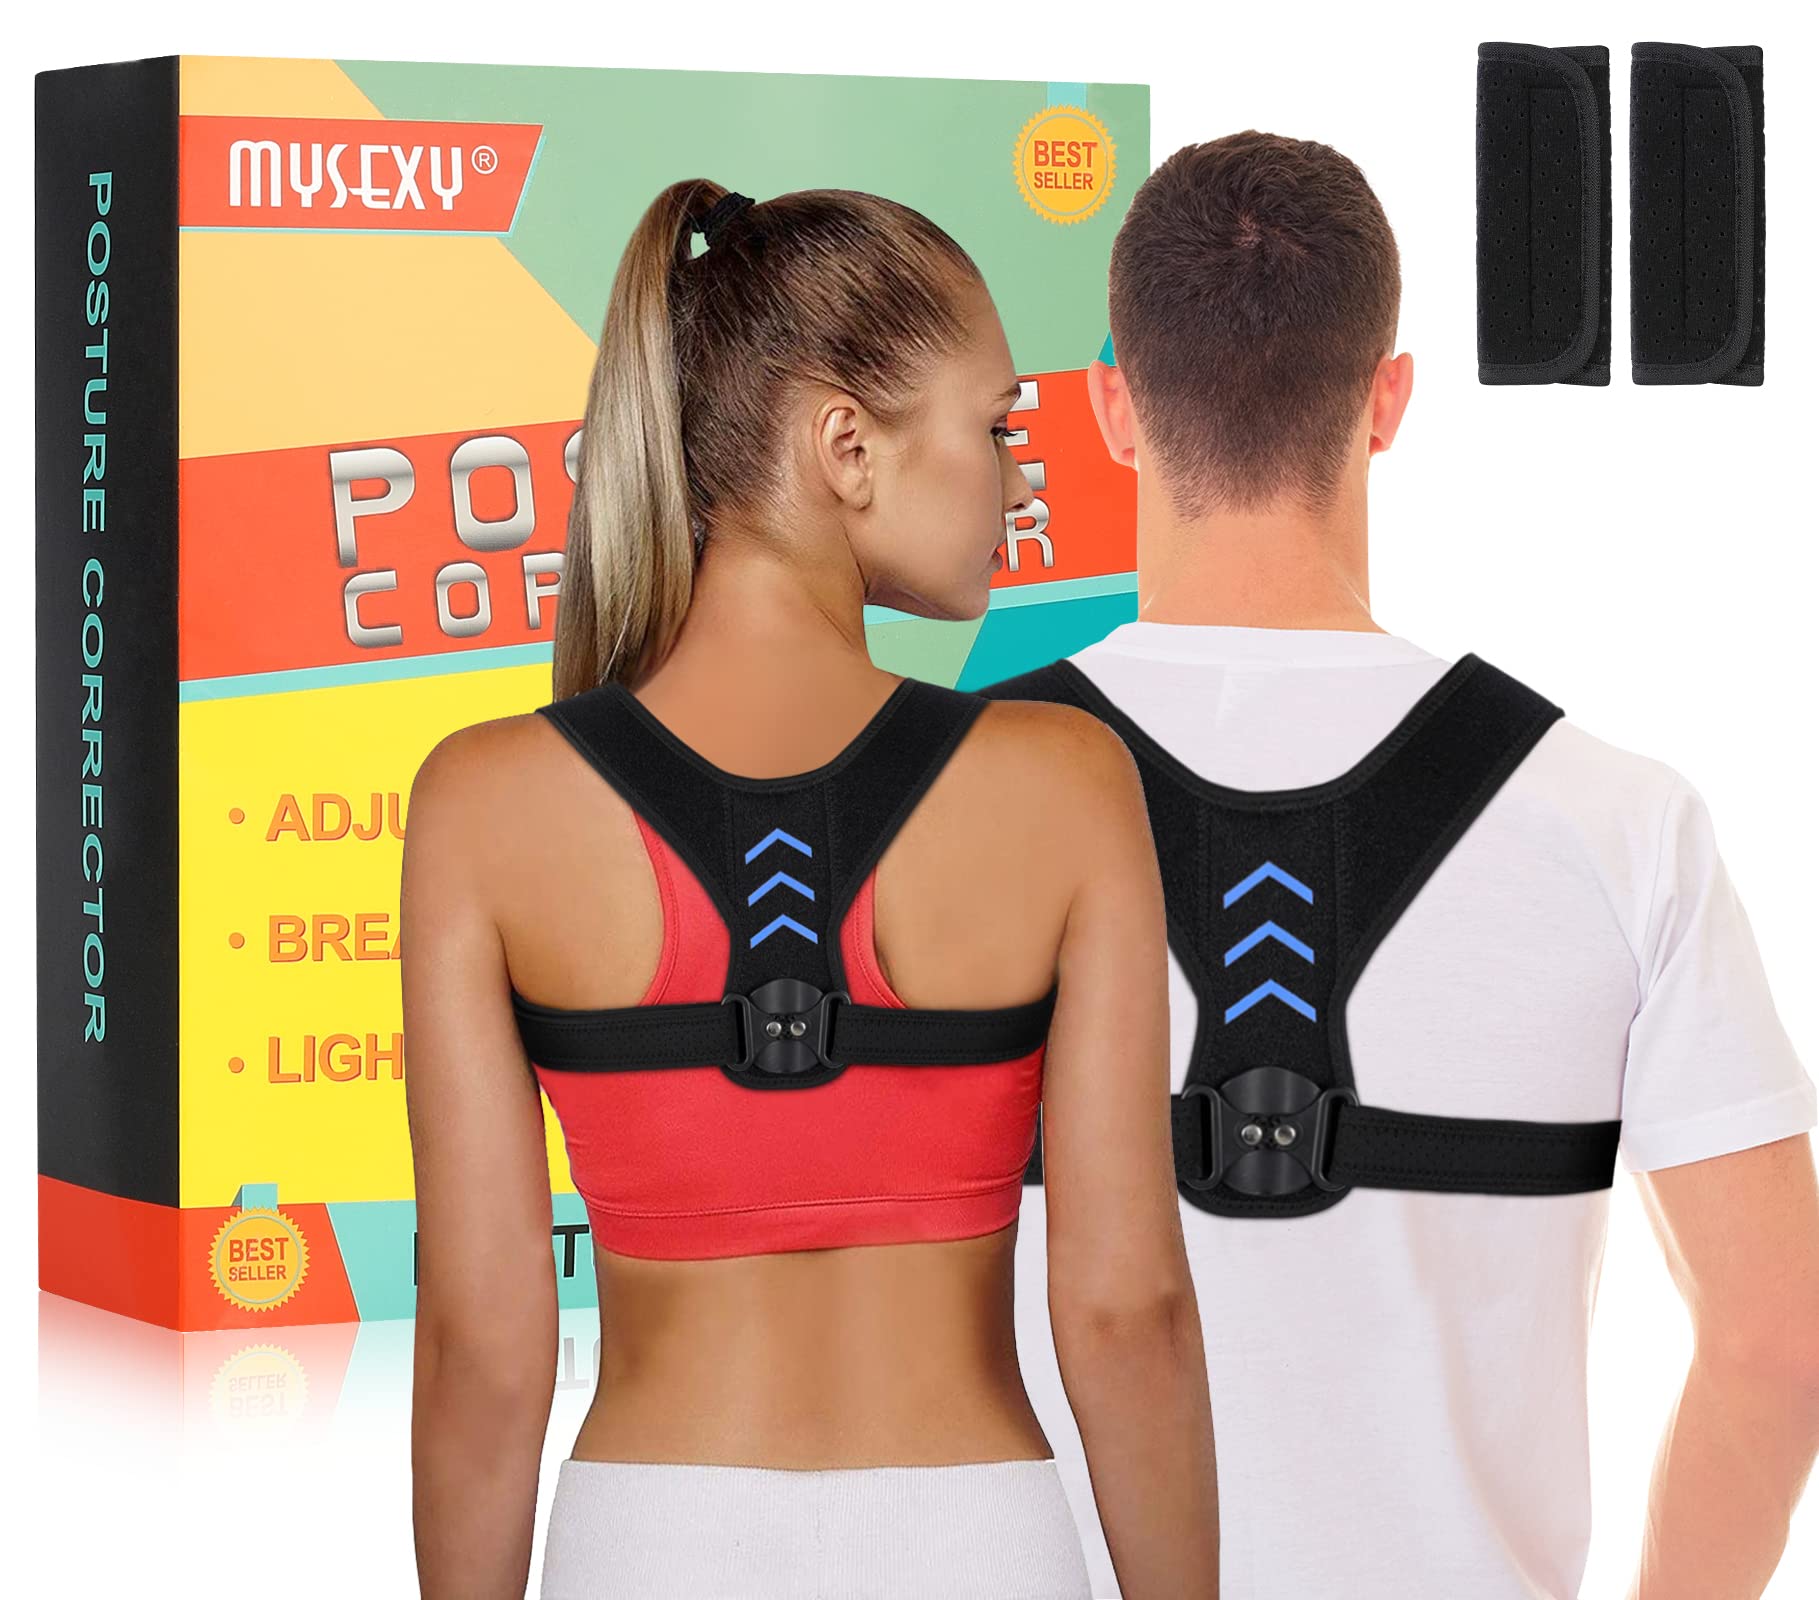 MYSEXY Posture Corrector Upper Back Brace For Women and Men Neck